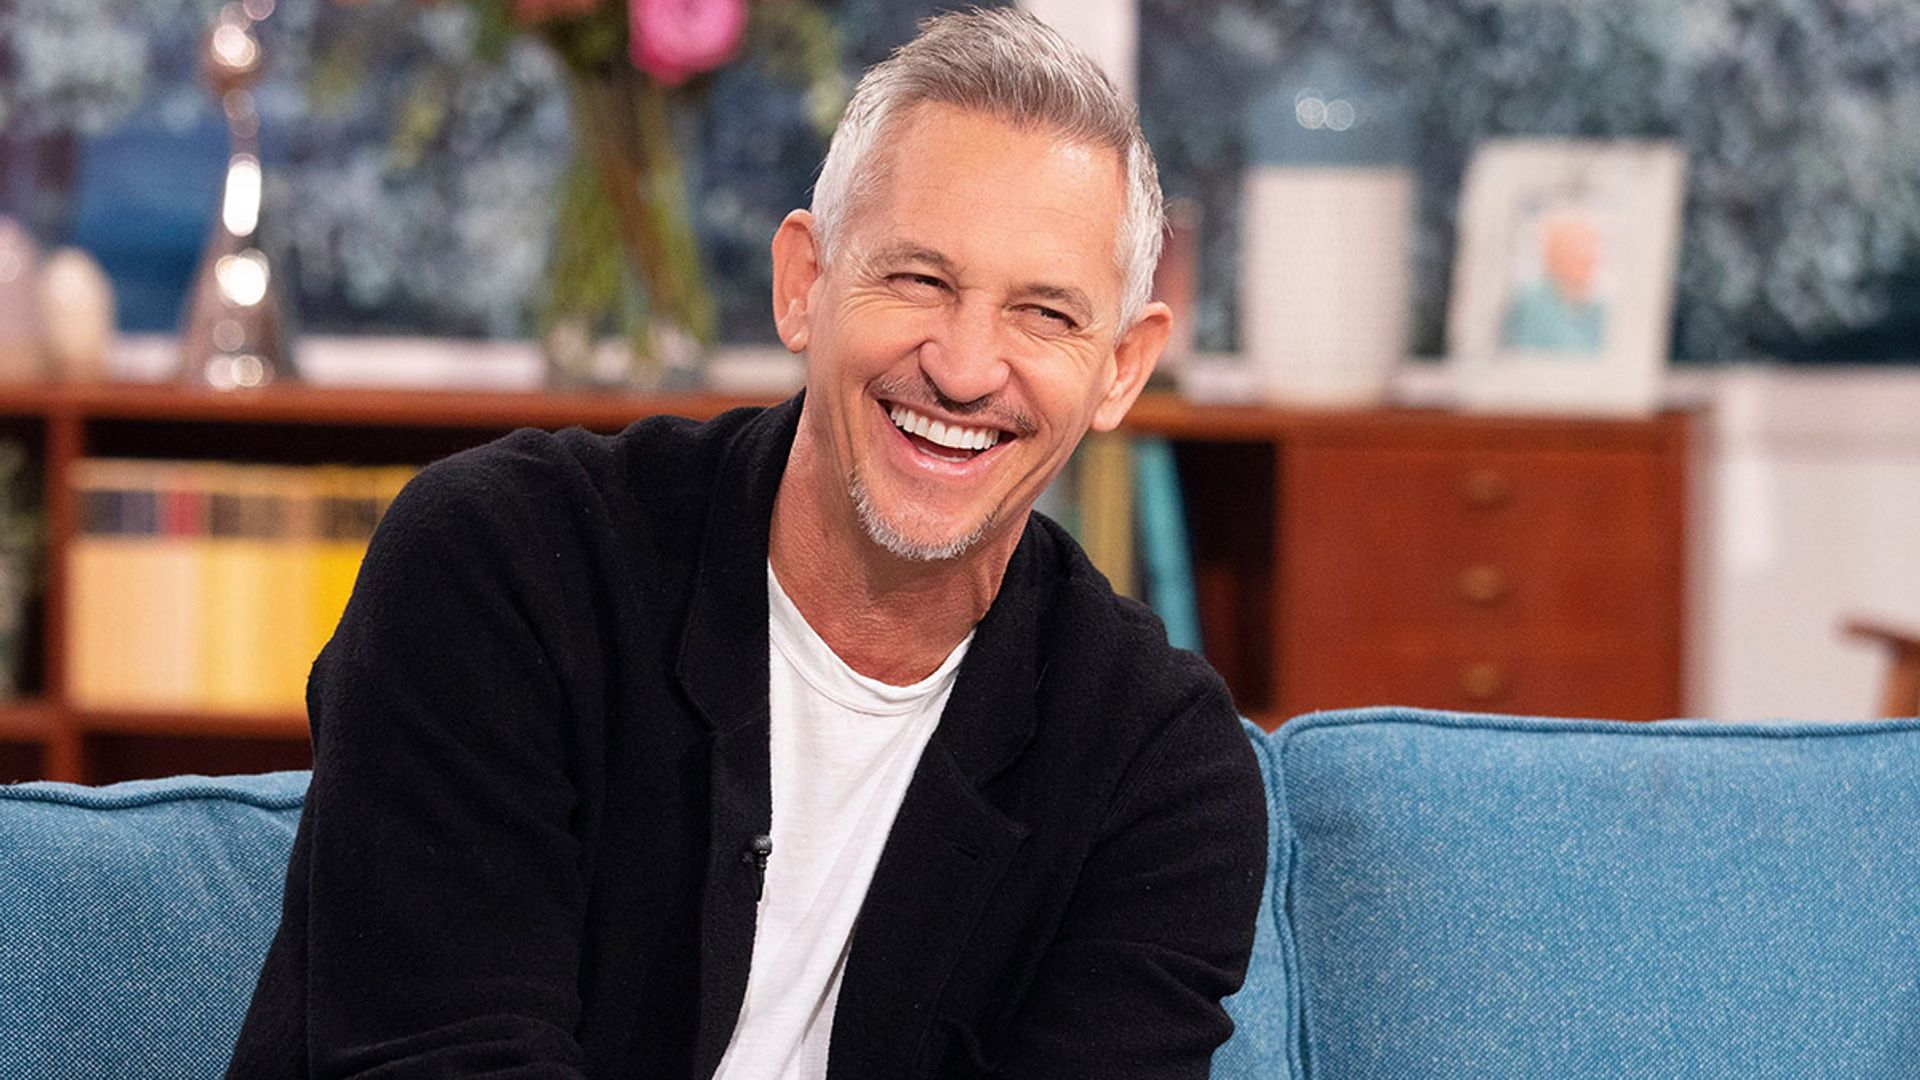 Gary Lineker's vintage living room is even more luxurious than we thought